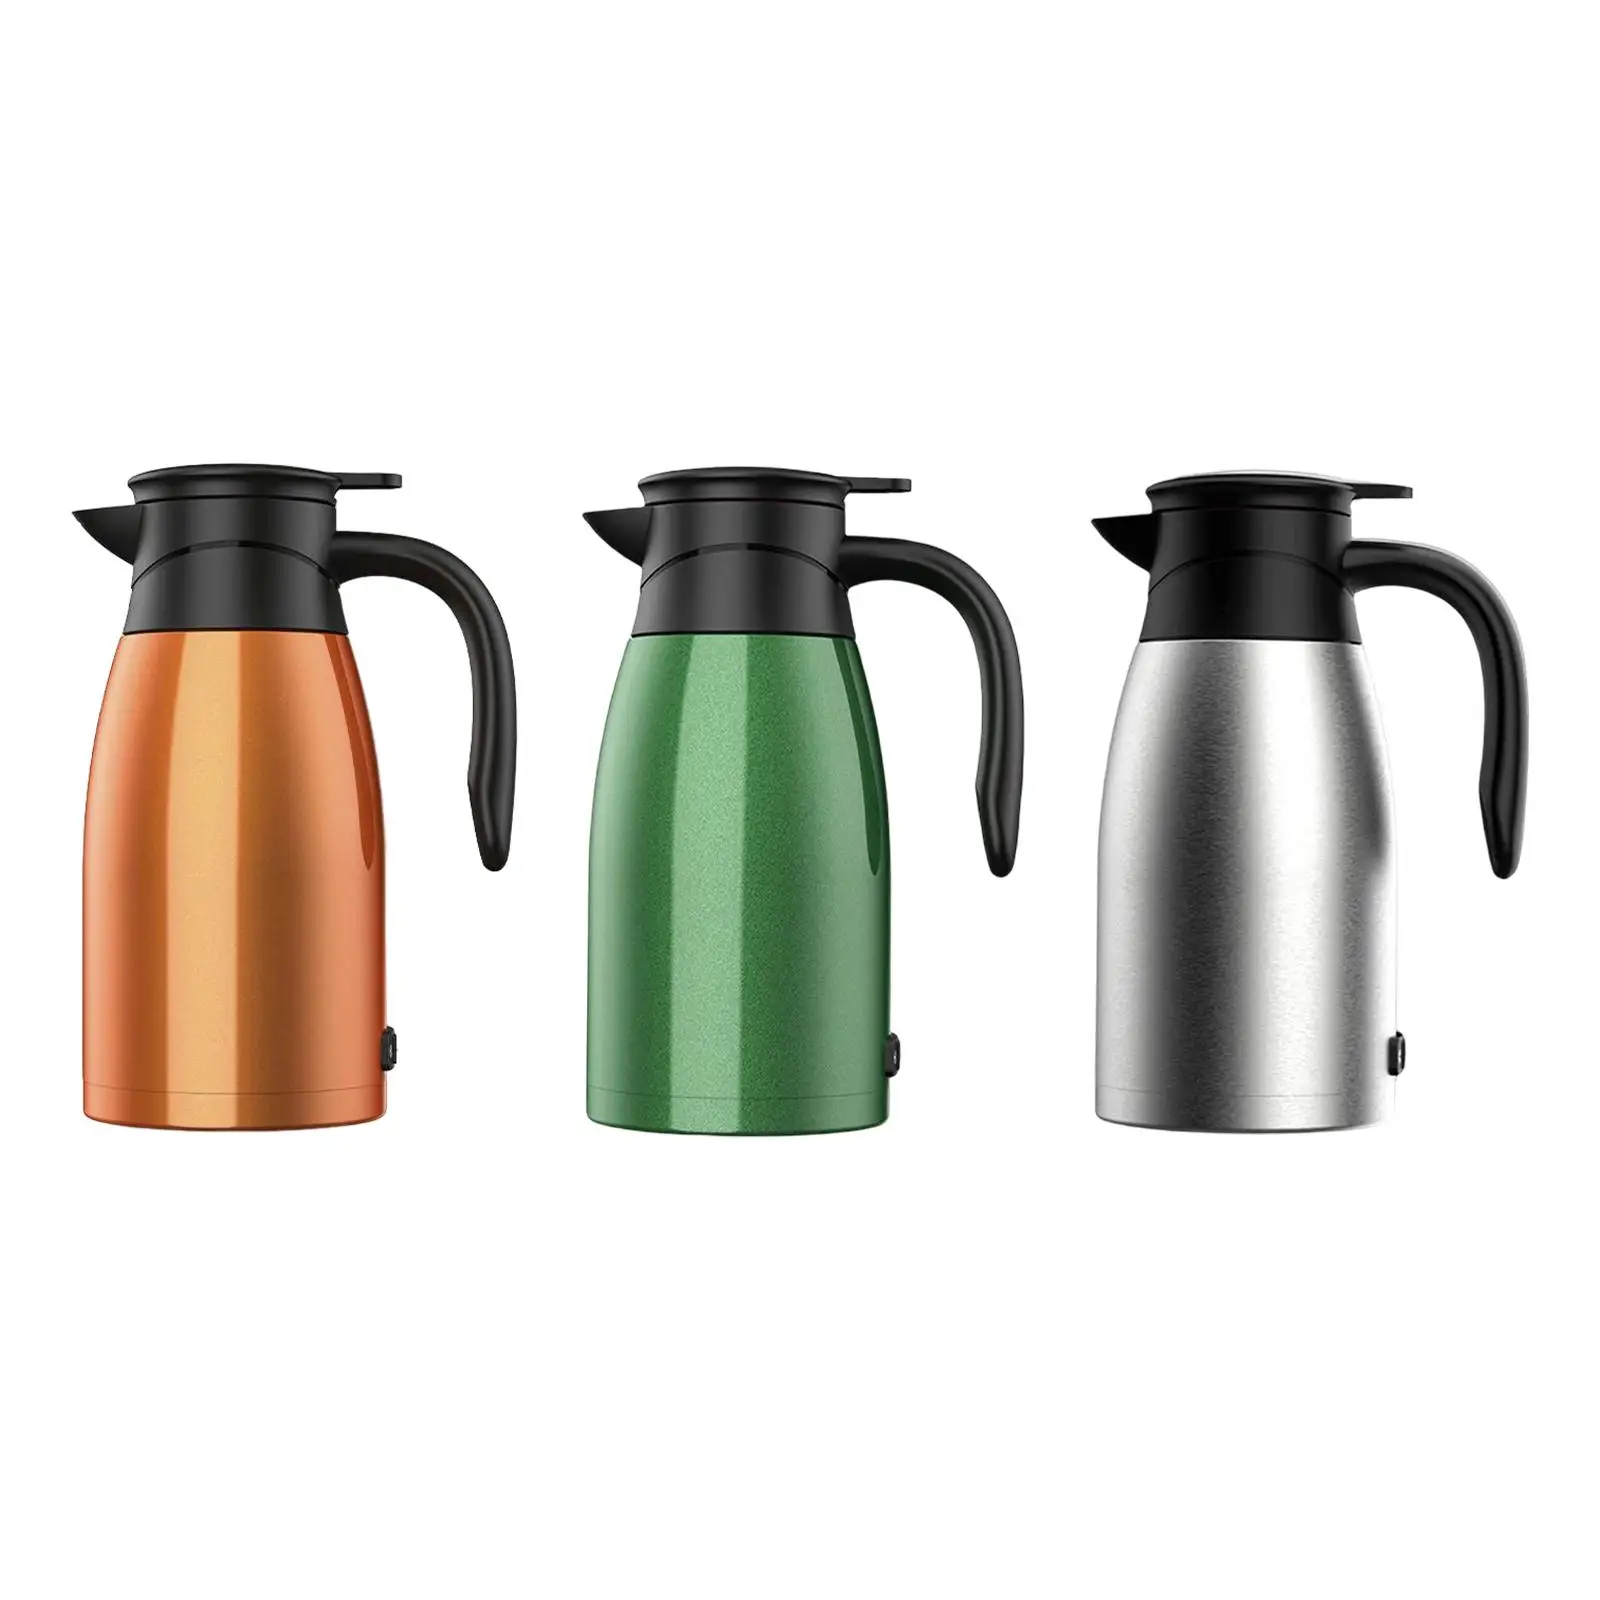 12V Portable Car Electric Kettle / Temperature Display Warmer Smart Stainless